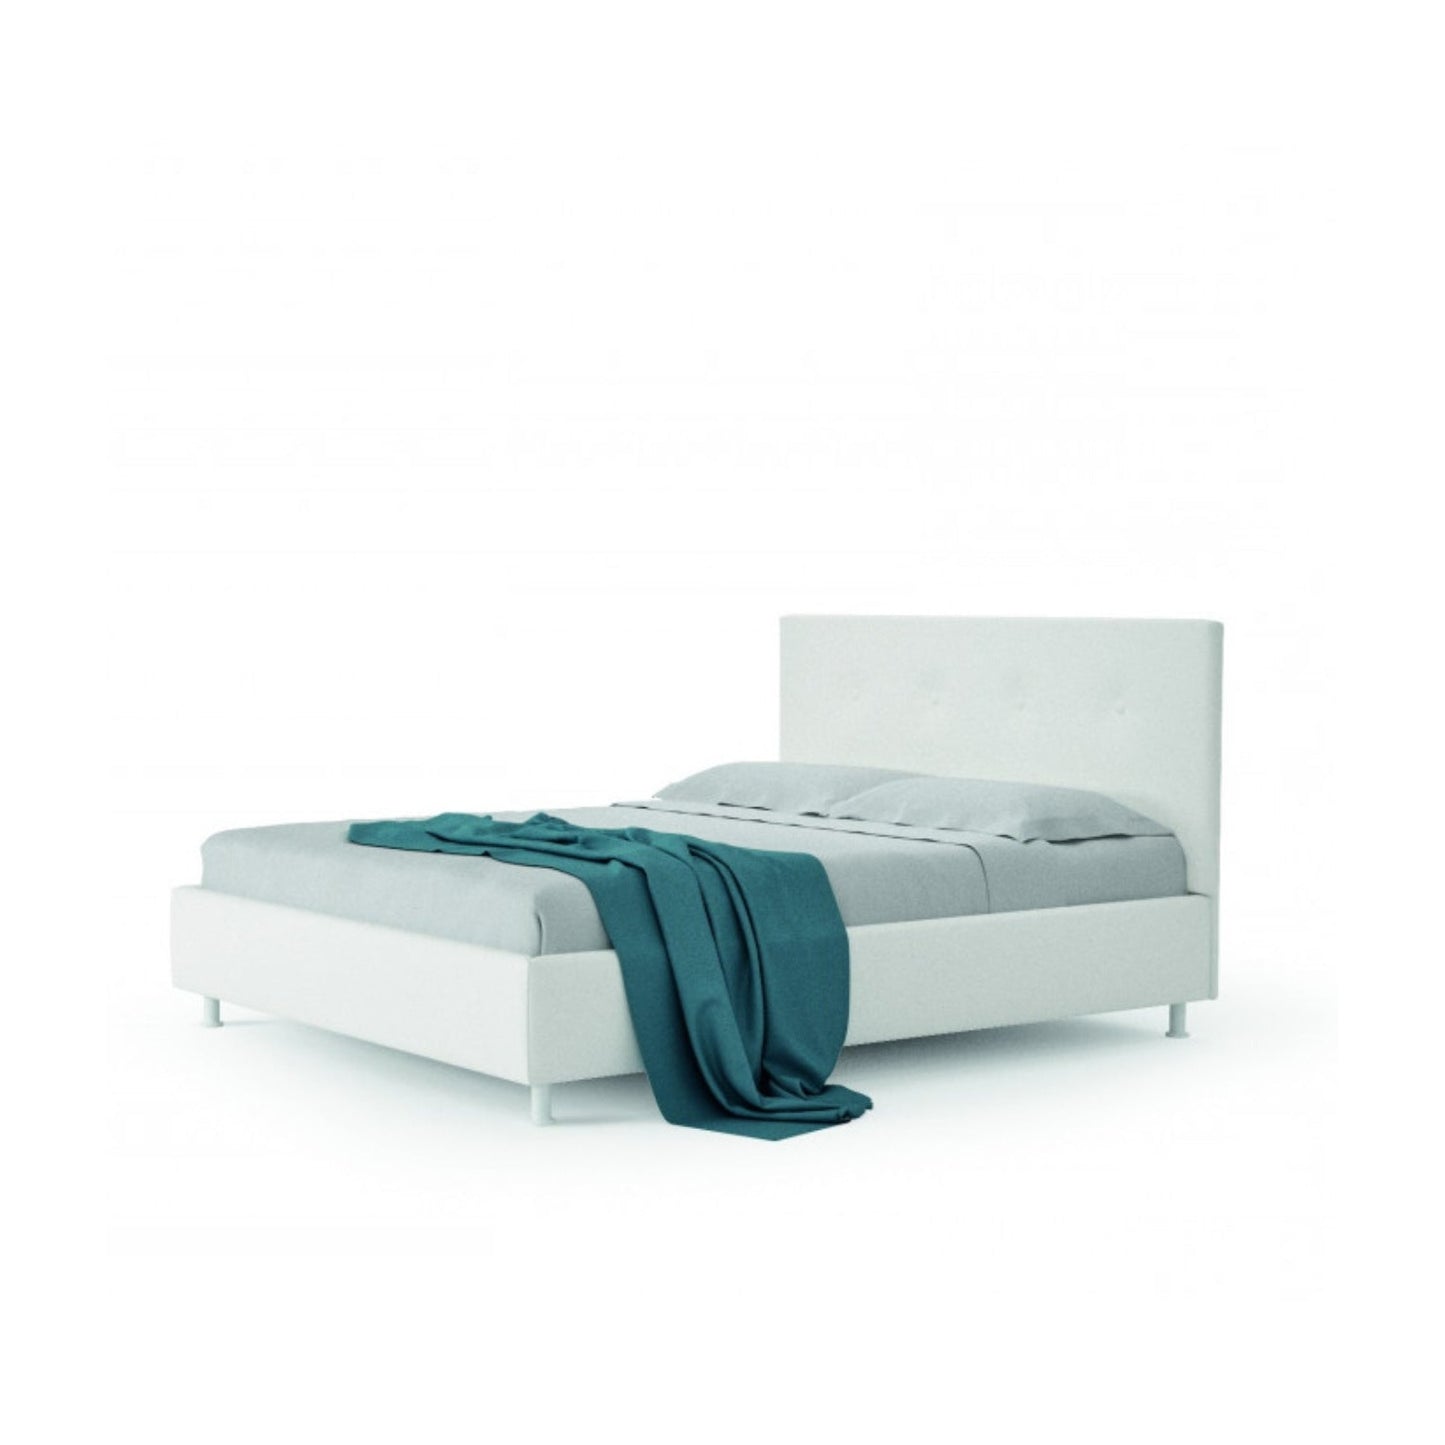 Eros Upholstered Bed by Santa Lucia